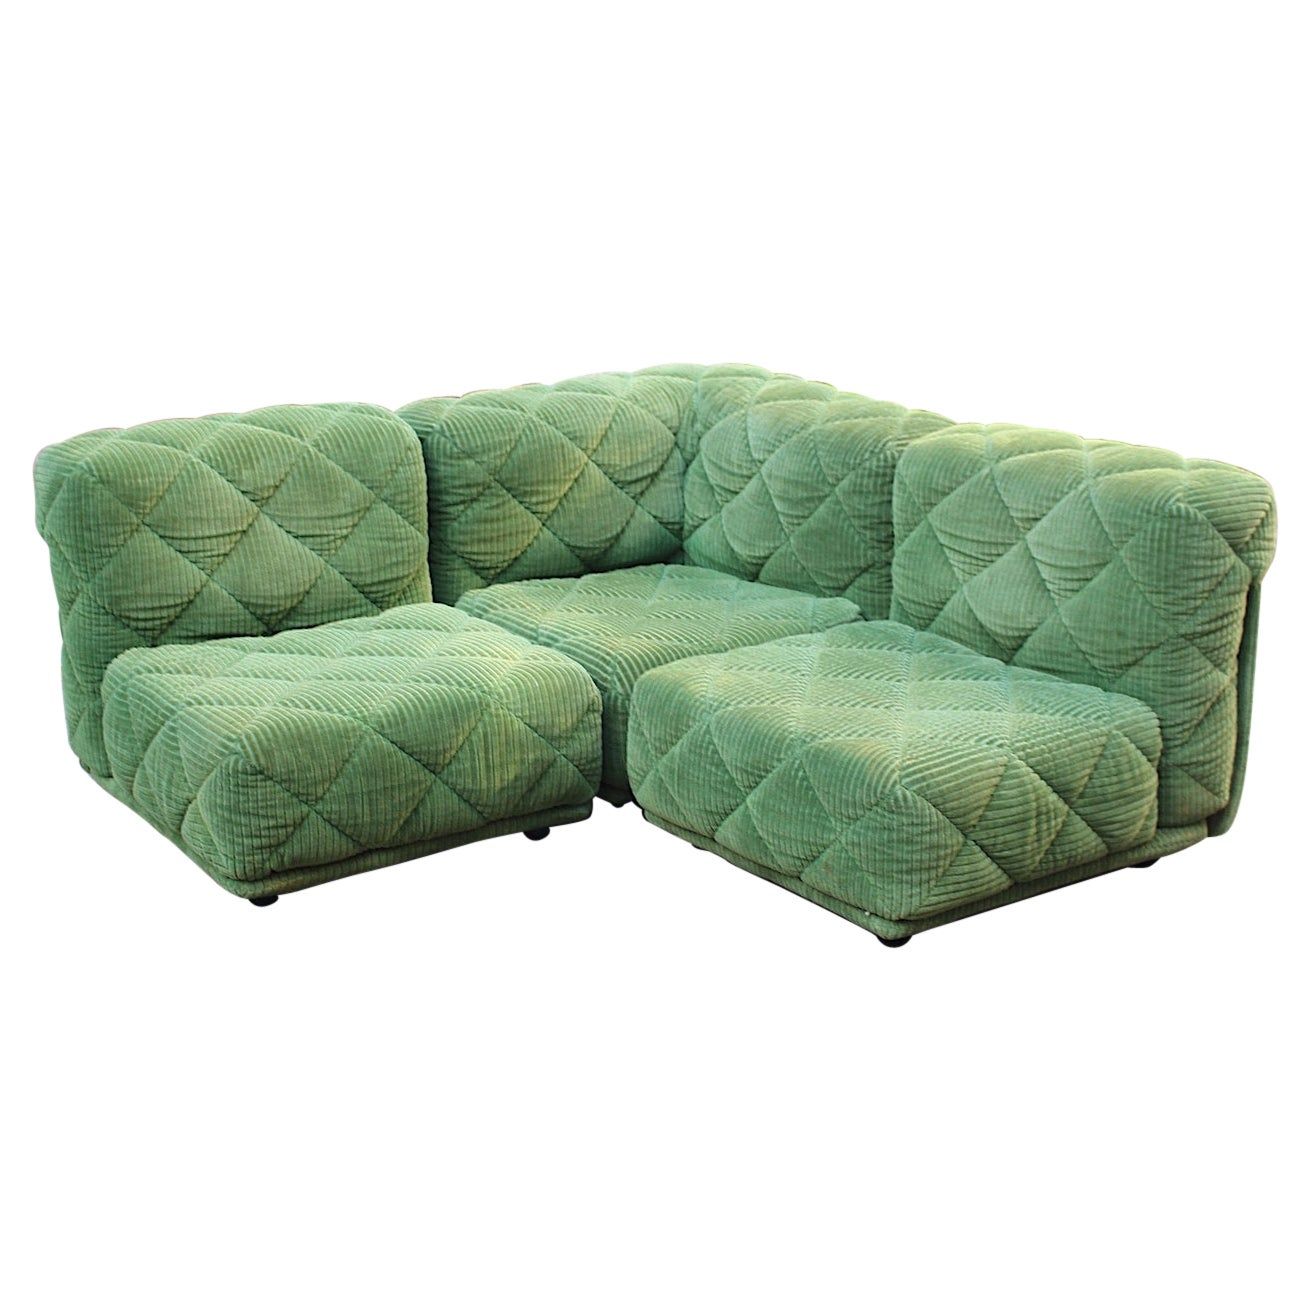 Space Age Vintage Green Velvet Sectional Modular Sofa Wittmann 1970s Inside Green Velvet Modular Sectionals (View 15 of 20)